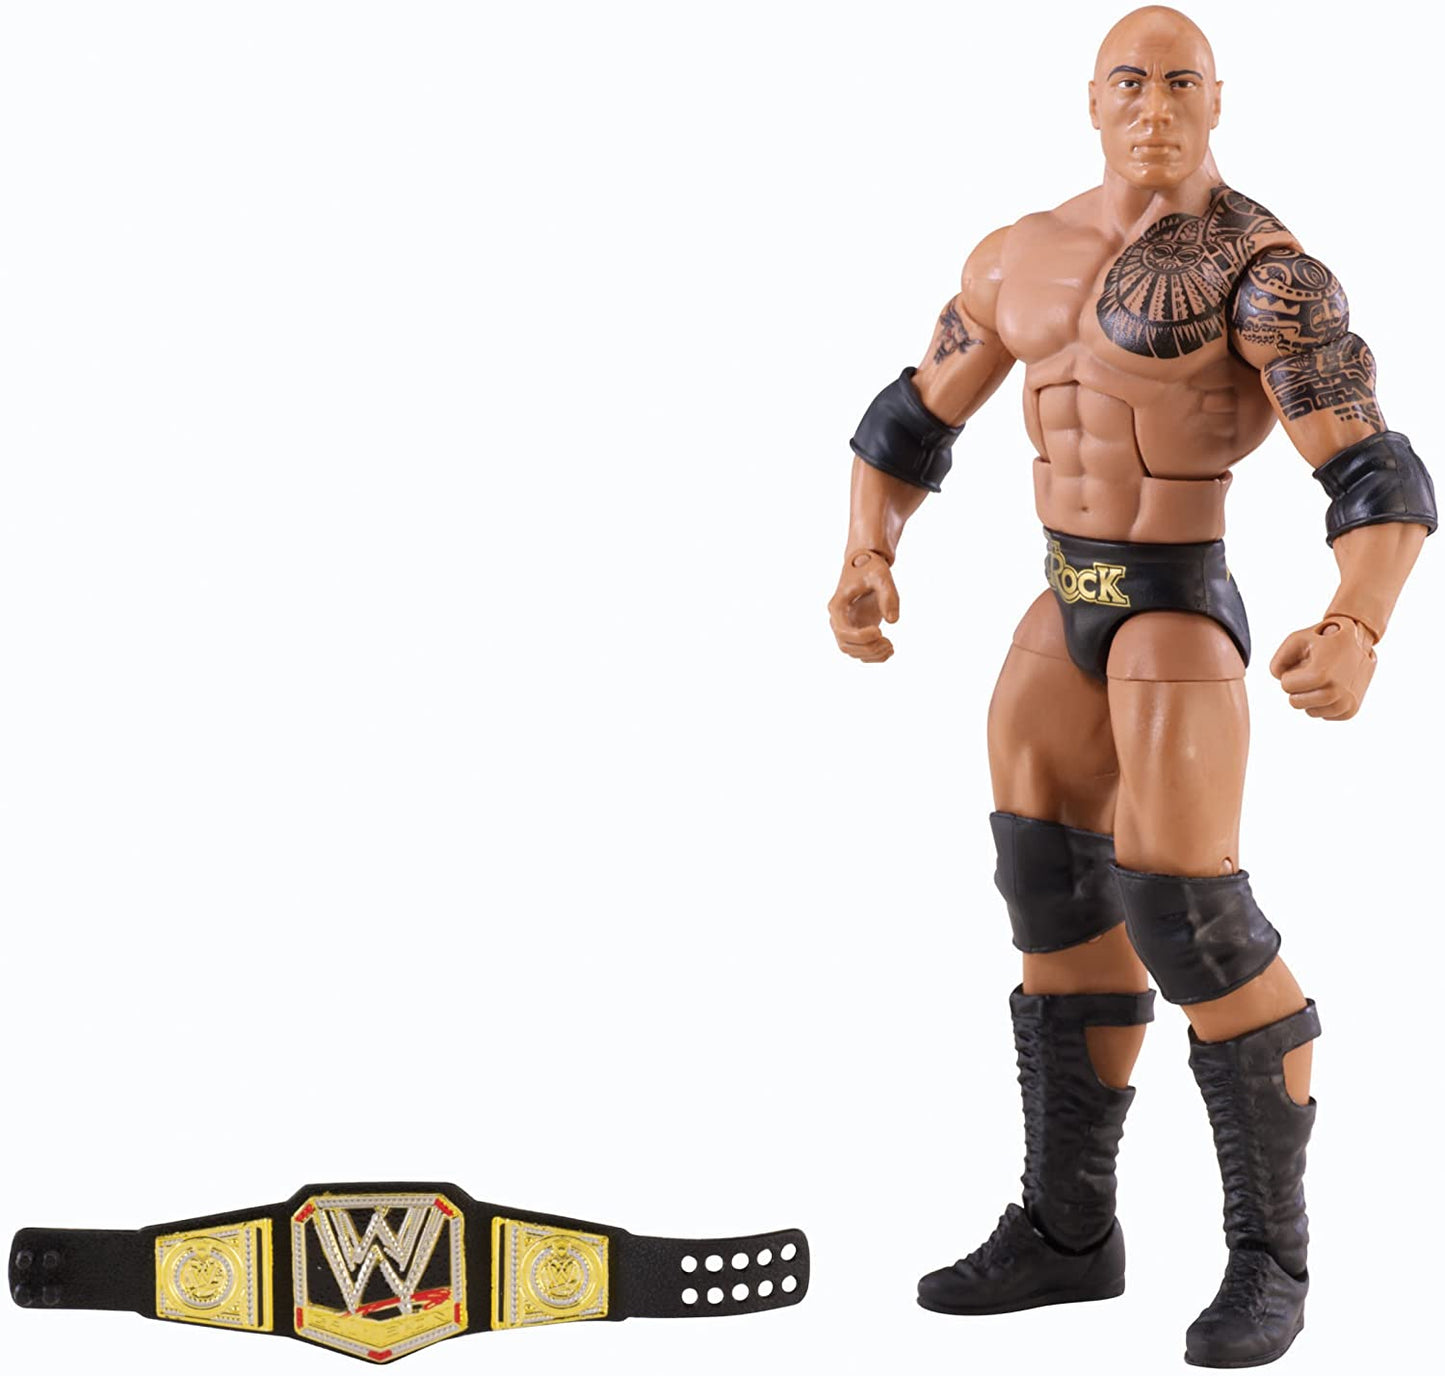 WWE Mattel Elite Collection Series 22 The Rock